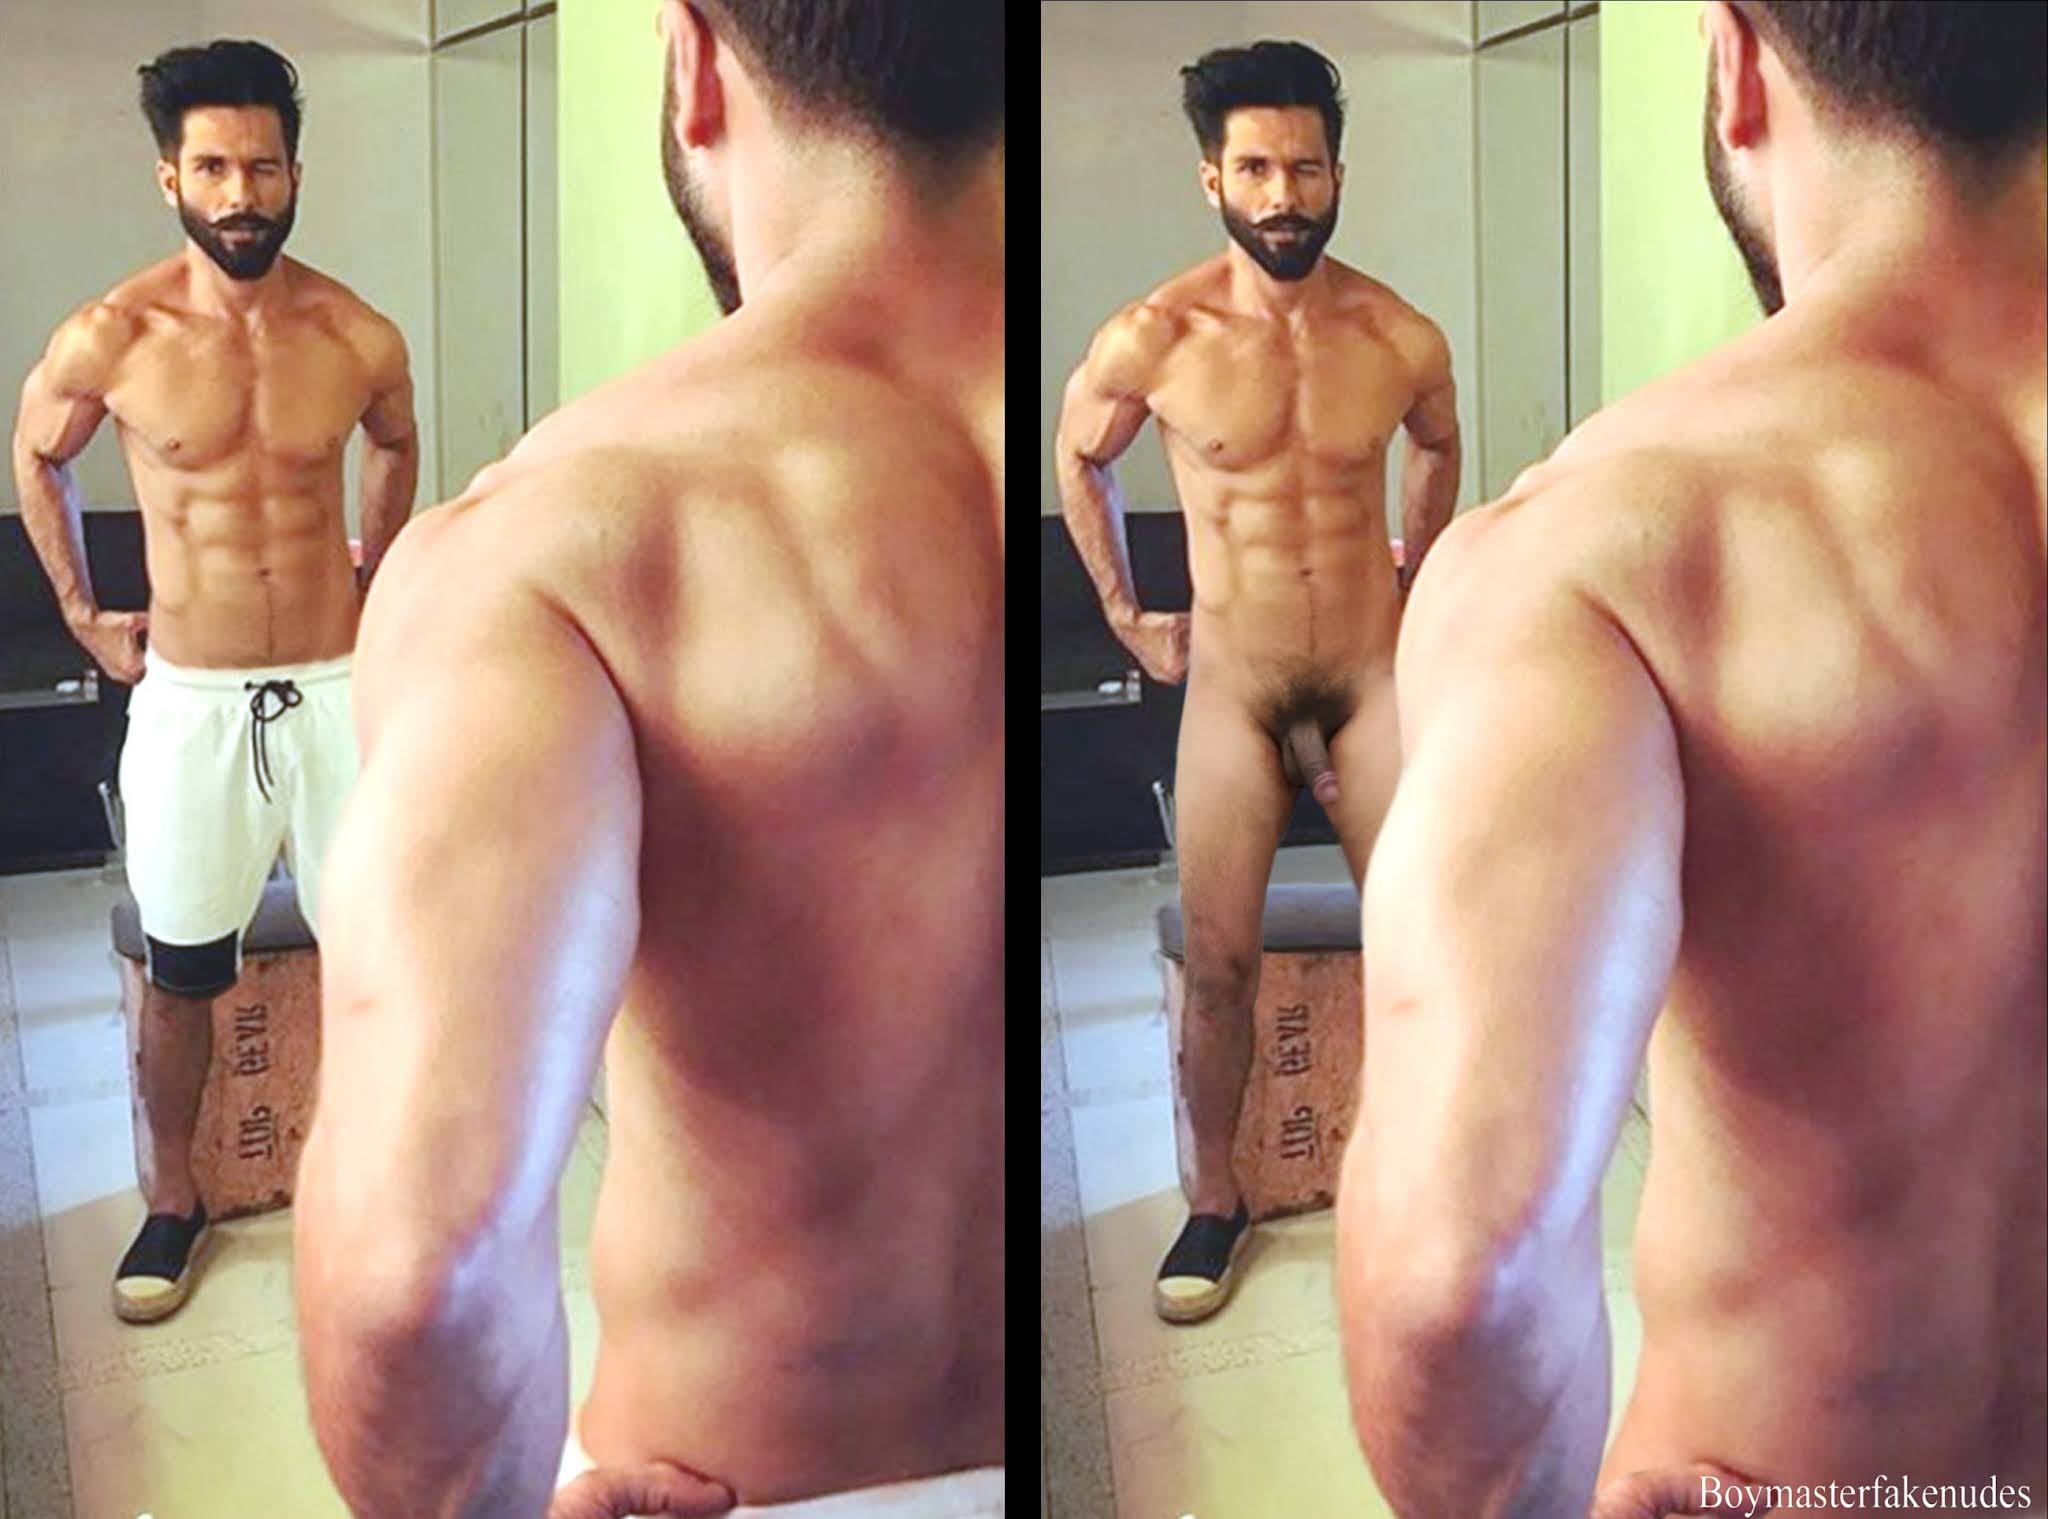 Boymaster Fake Nudes: Shahid Kapoor . Indian actor gets naked and shows  cock.